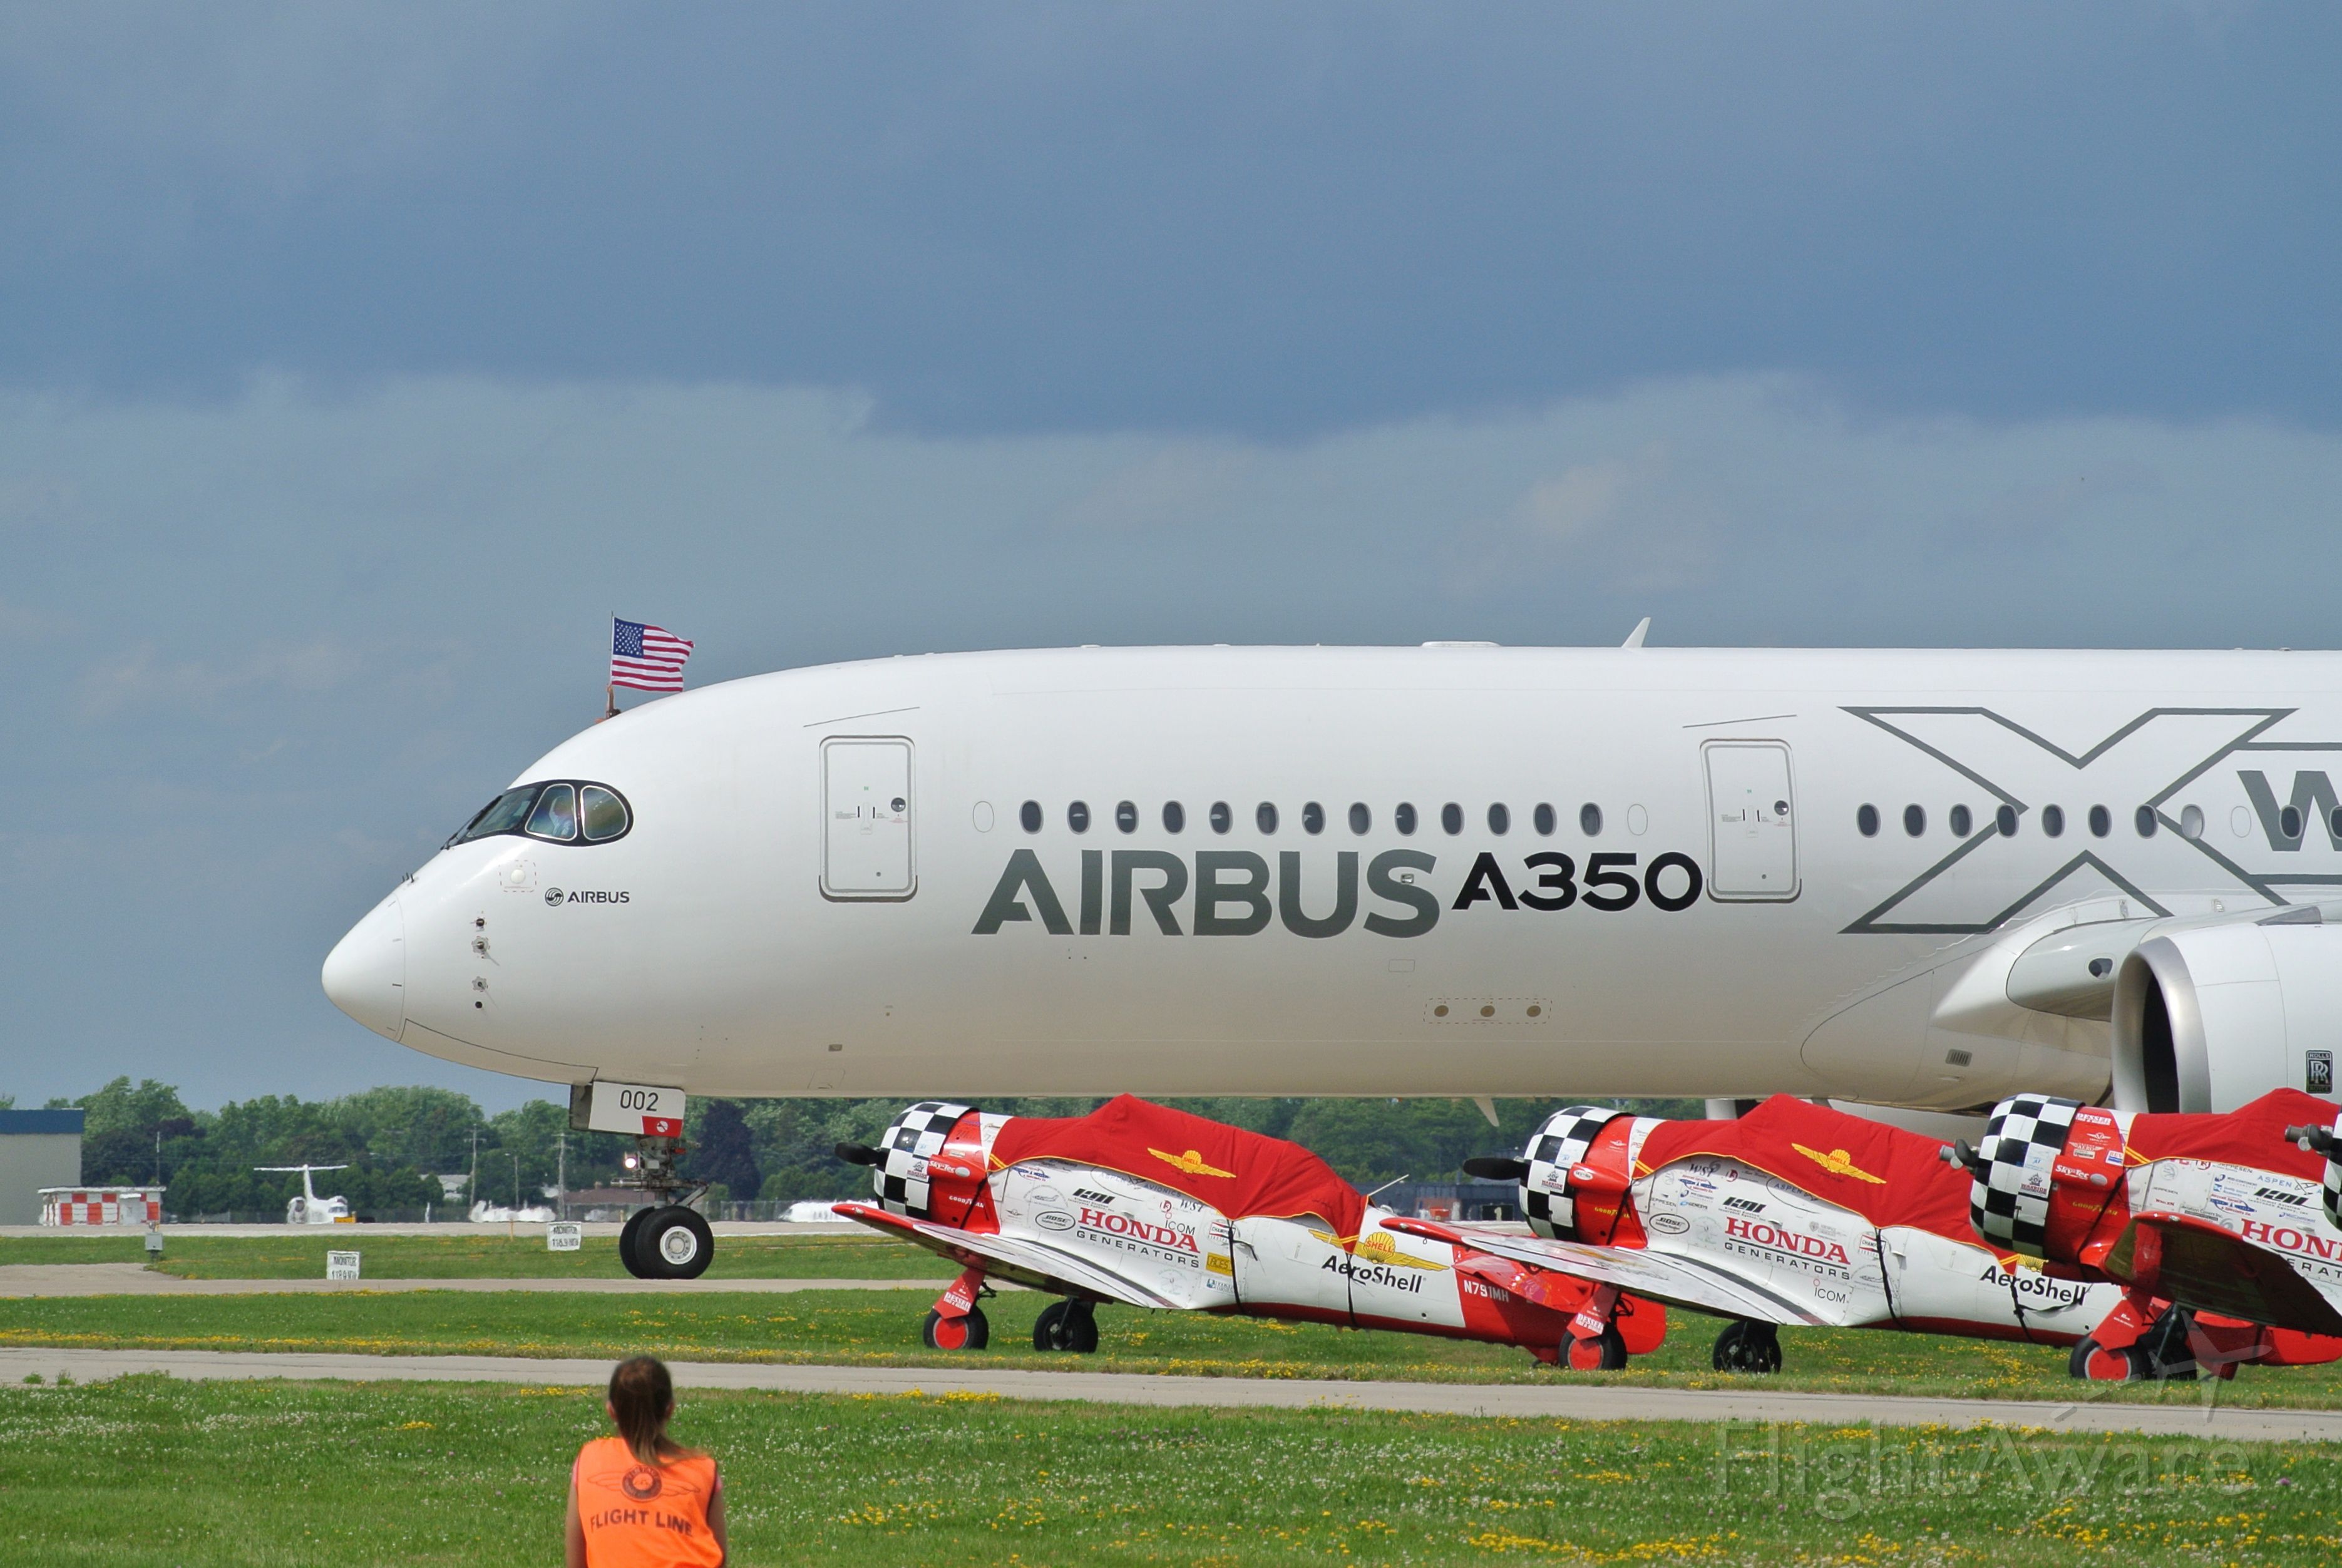 Airbus A350-900 (F-WWCF) - American Flag flying out of the Airbus A350 at Air Venture 2015 after arrival